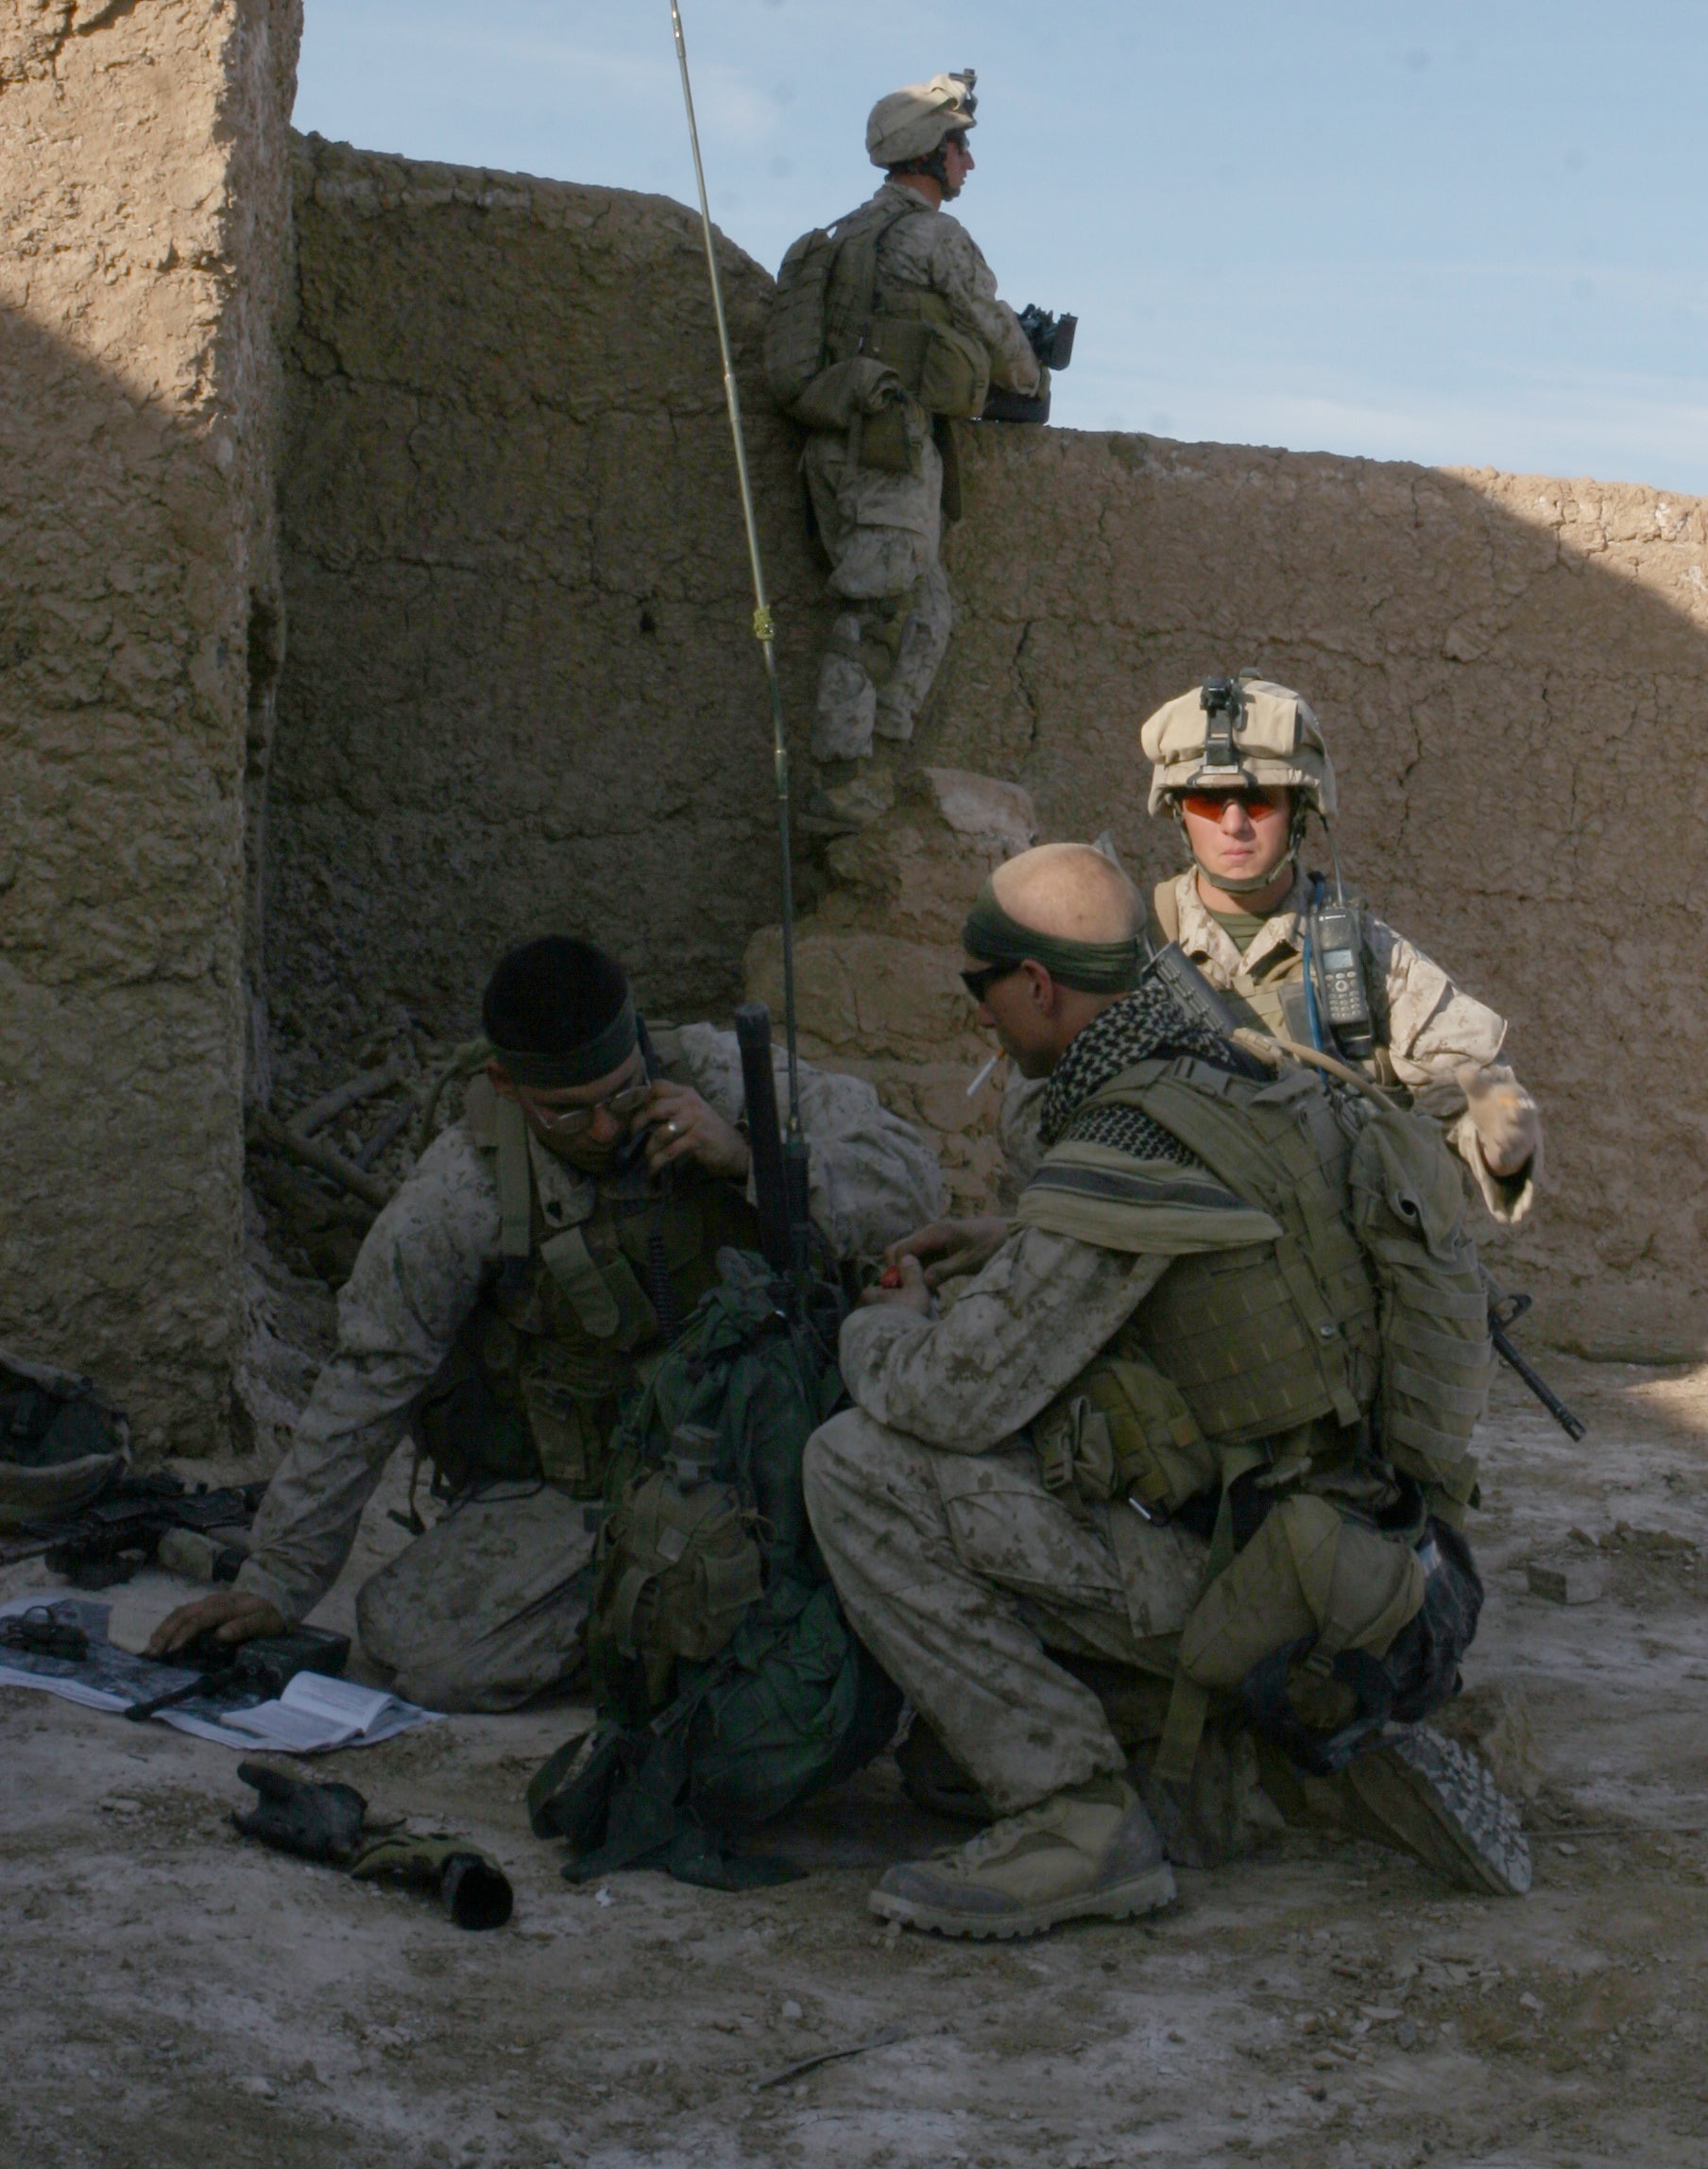 Sgt. Bill Bee, left, on the radio during a firefight in Helmand province, Afghanistan in January 2010. (Cpl. James Clark/U.S. Marine Corps)